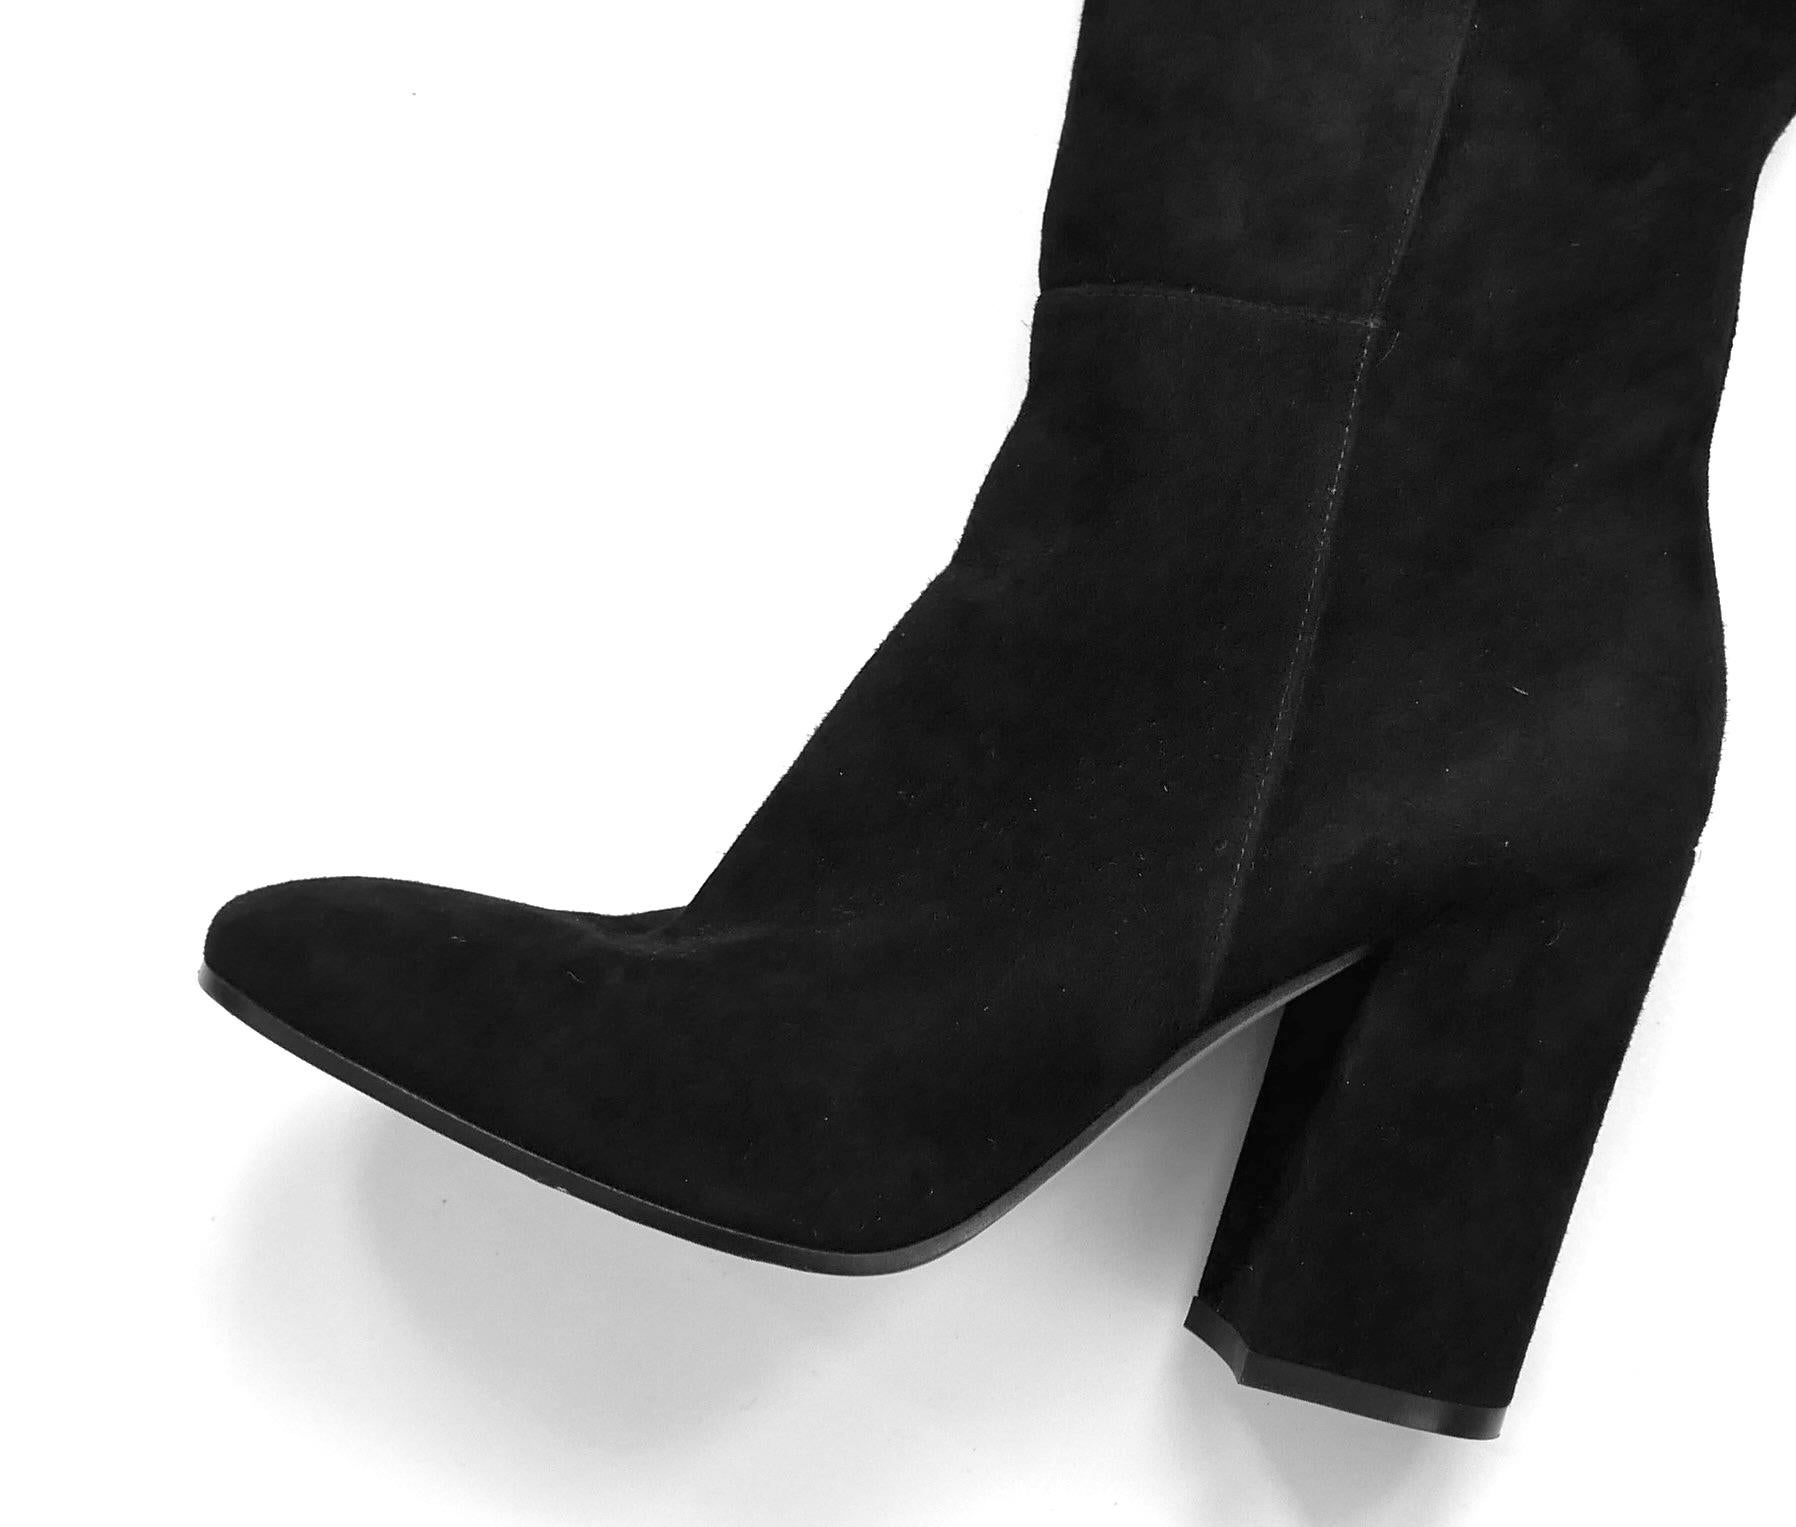 Fabulous Gianvito Rossi over the knee boots - bought for £1250 and worn once with dustbag. Made from soft black suede with silver tone fob inner side zips, gaiter tops, chunky heels and rounded toes. Lined in leather.
Size 36.5/Uk3.5 Measure approx